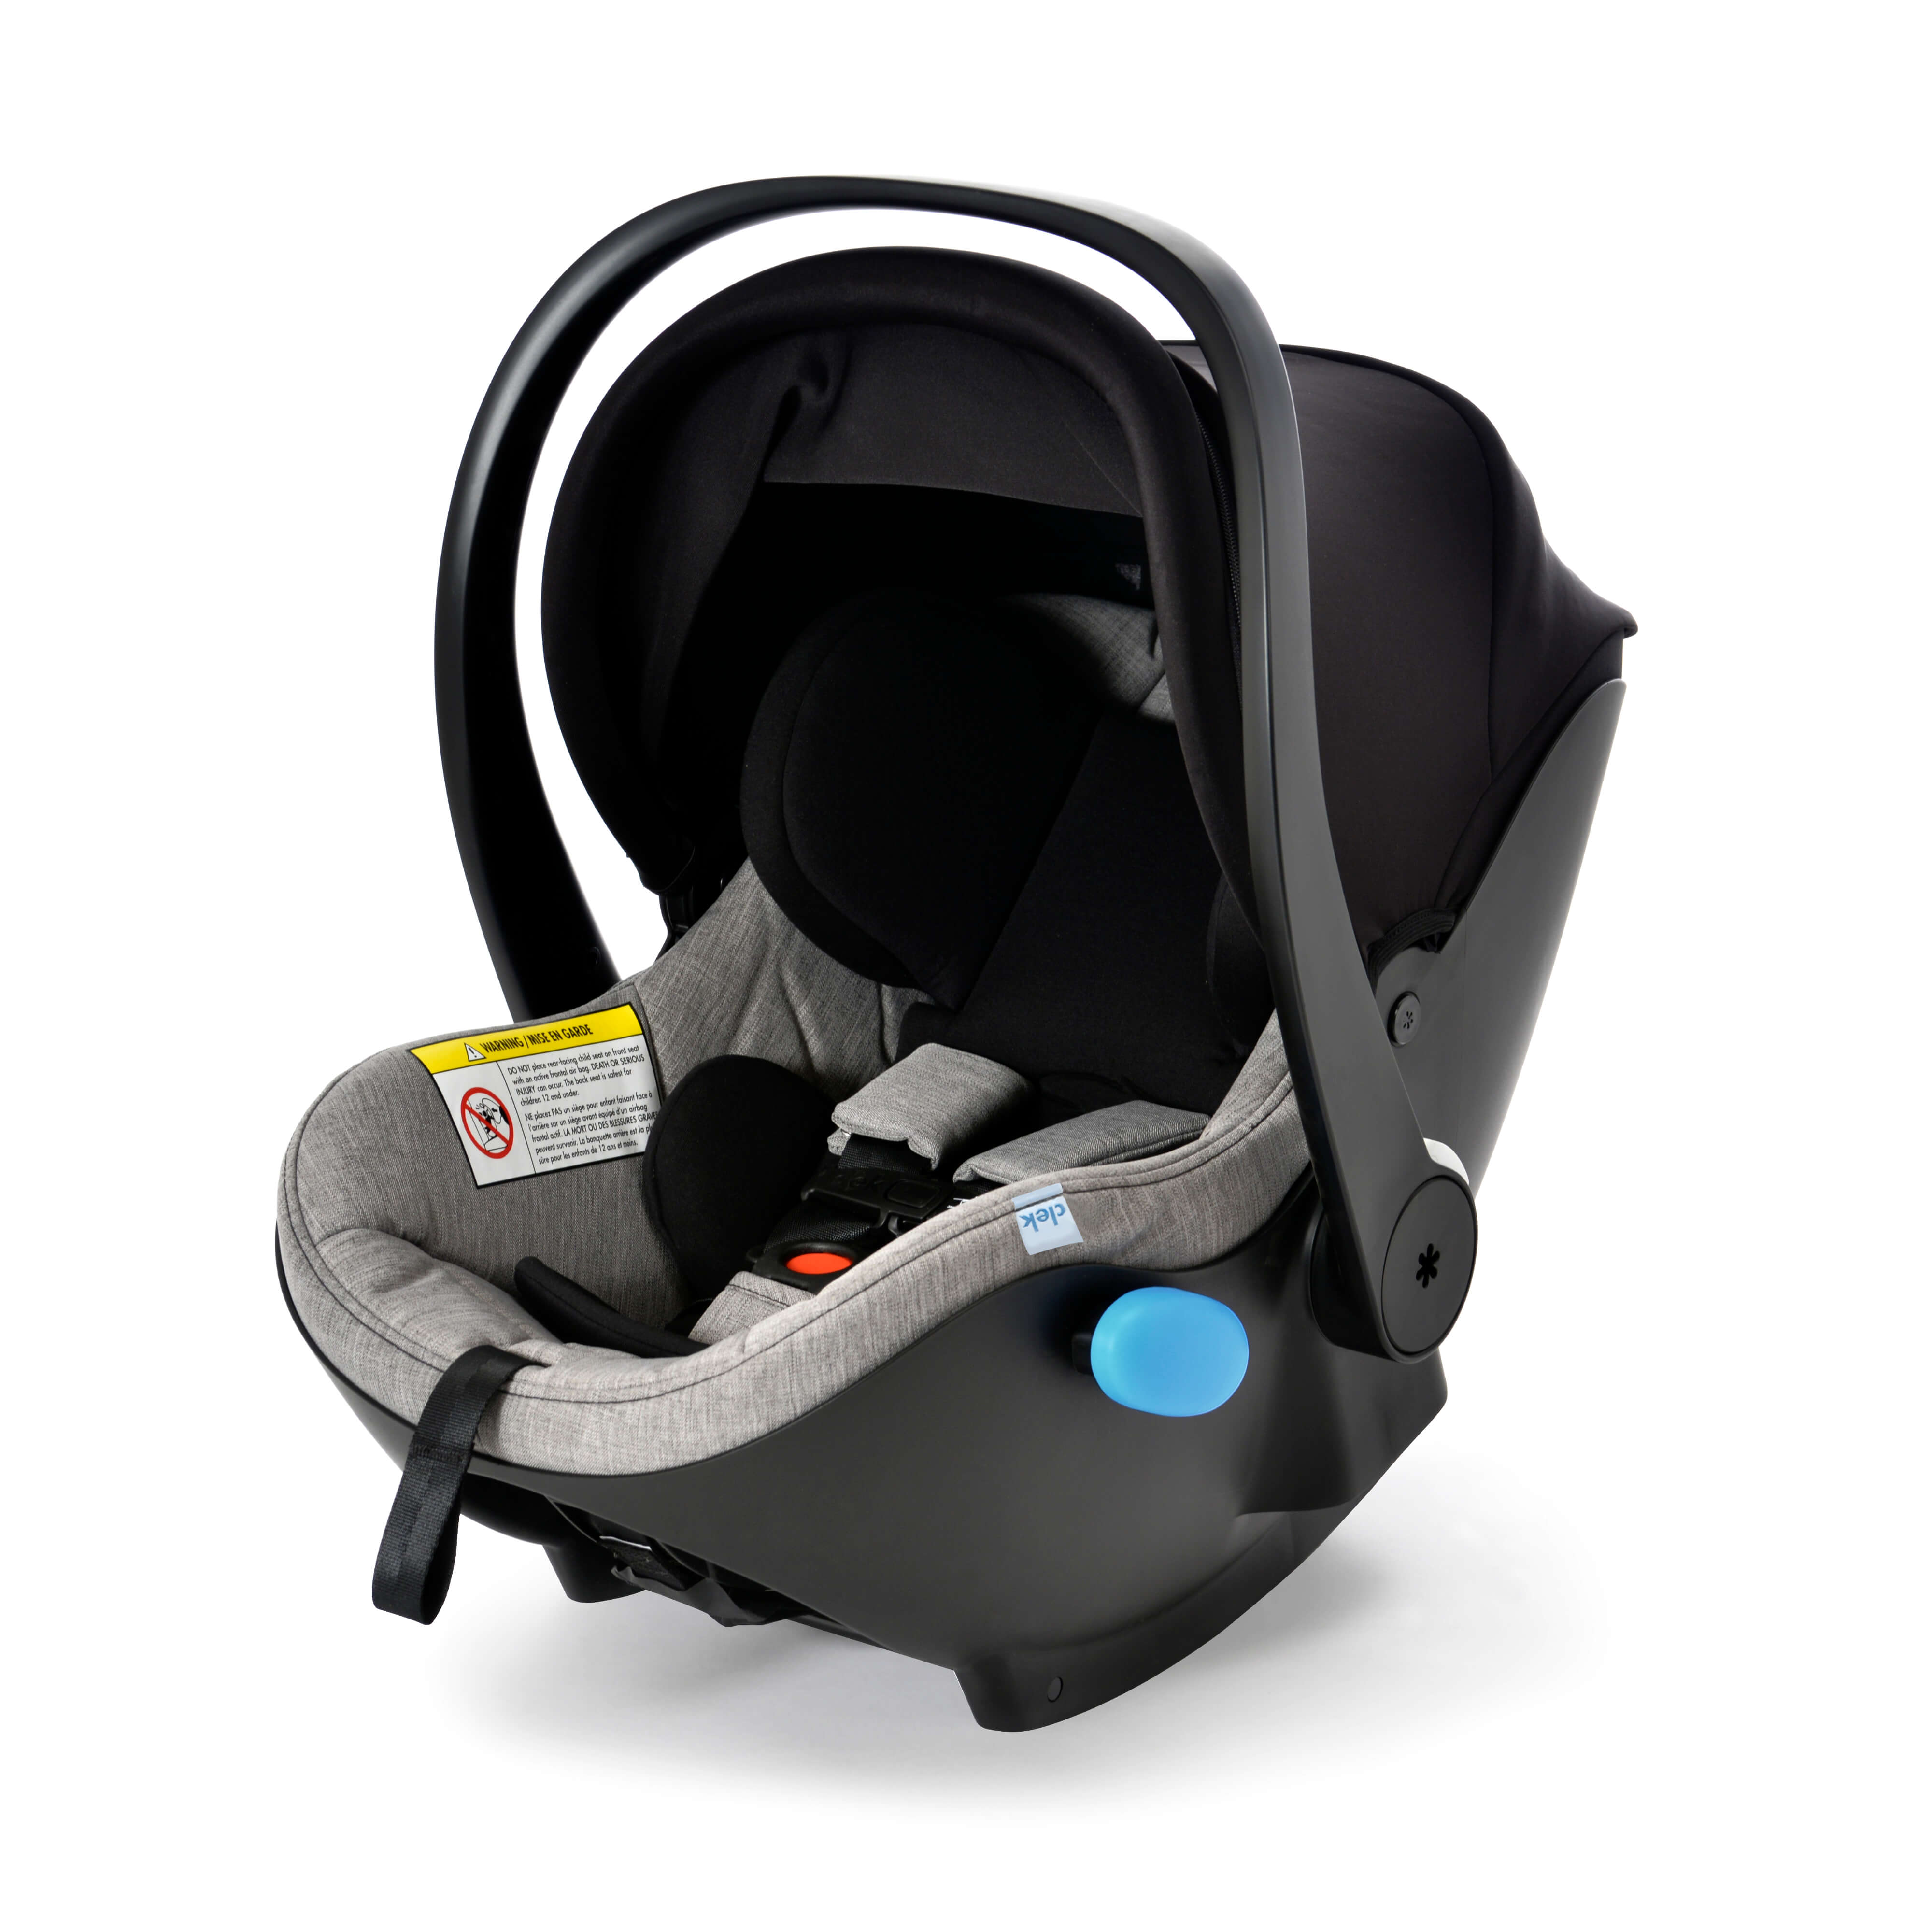 Best Baseless Infant Car Seat- The Liingo from Clek